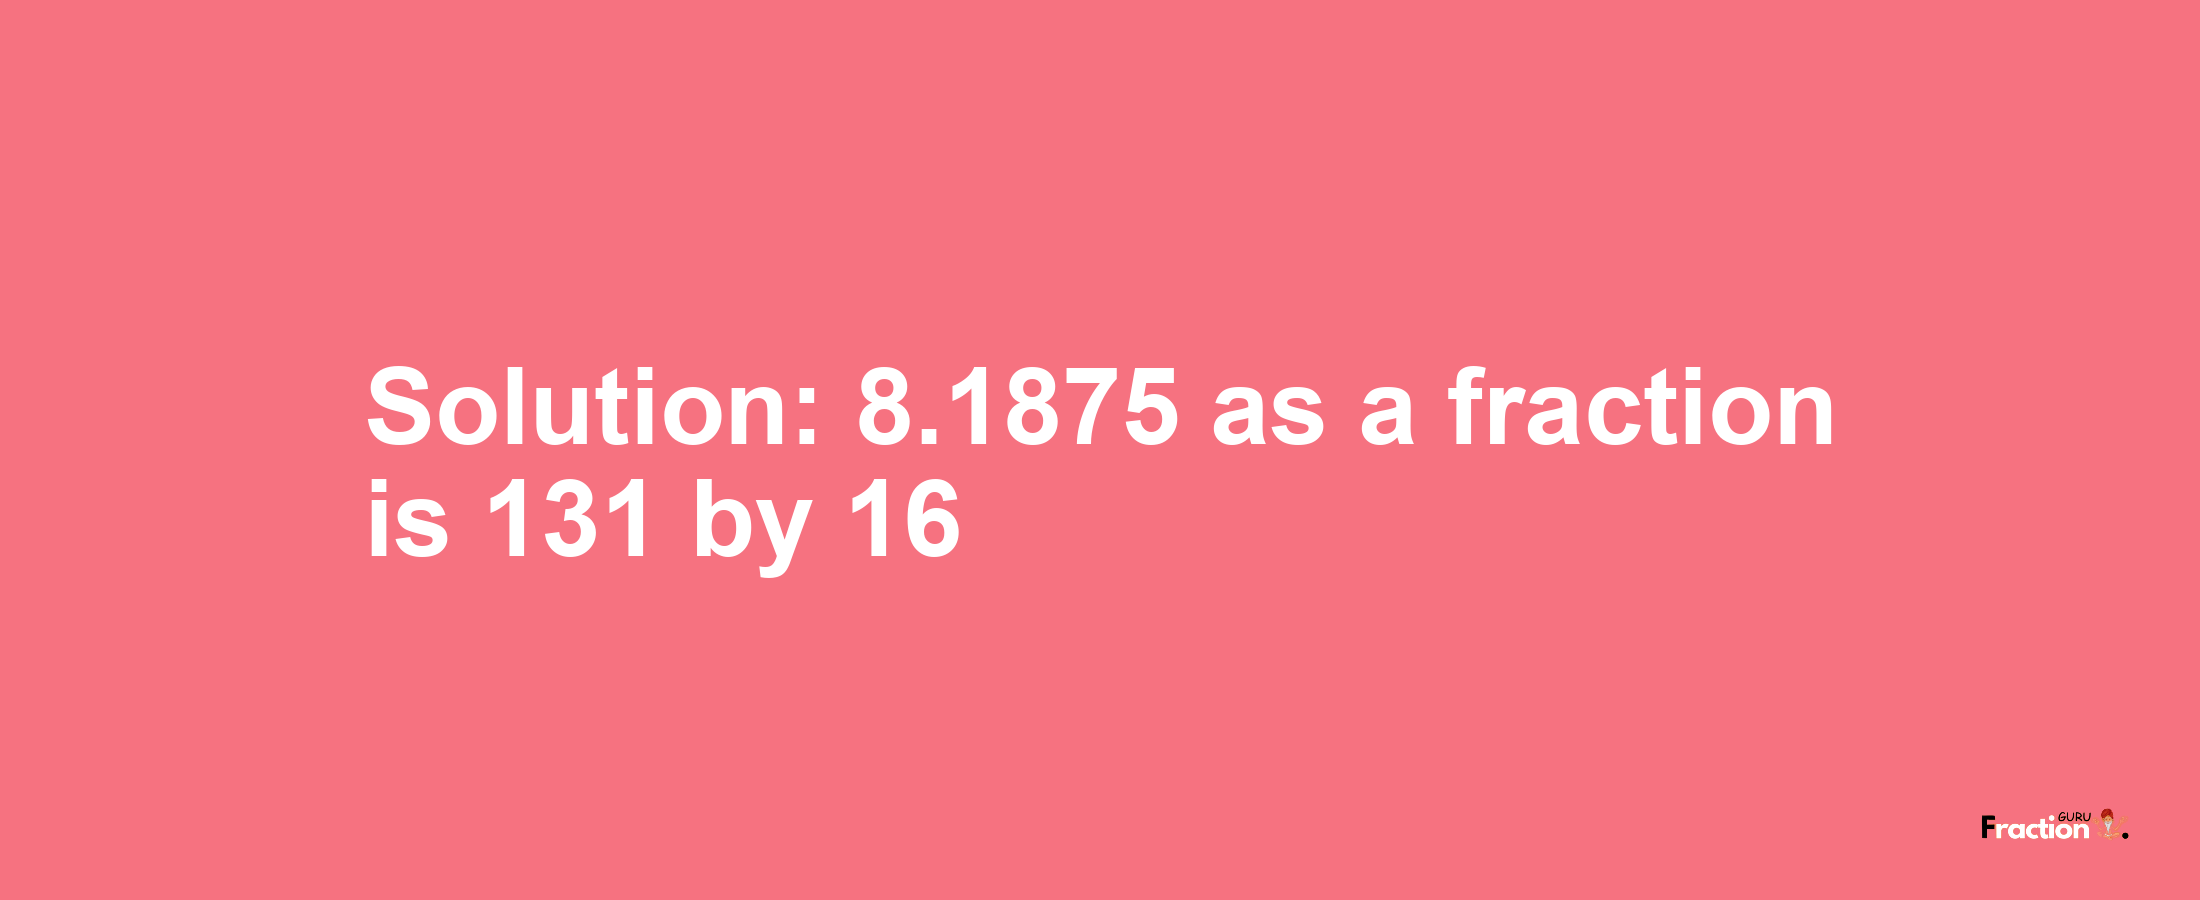 Solution:8.1875 as a fraction is 131/16